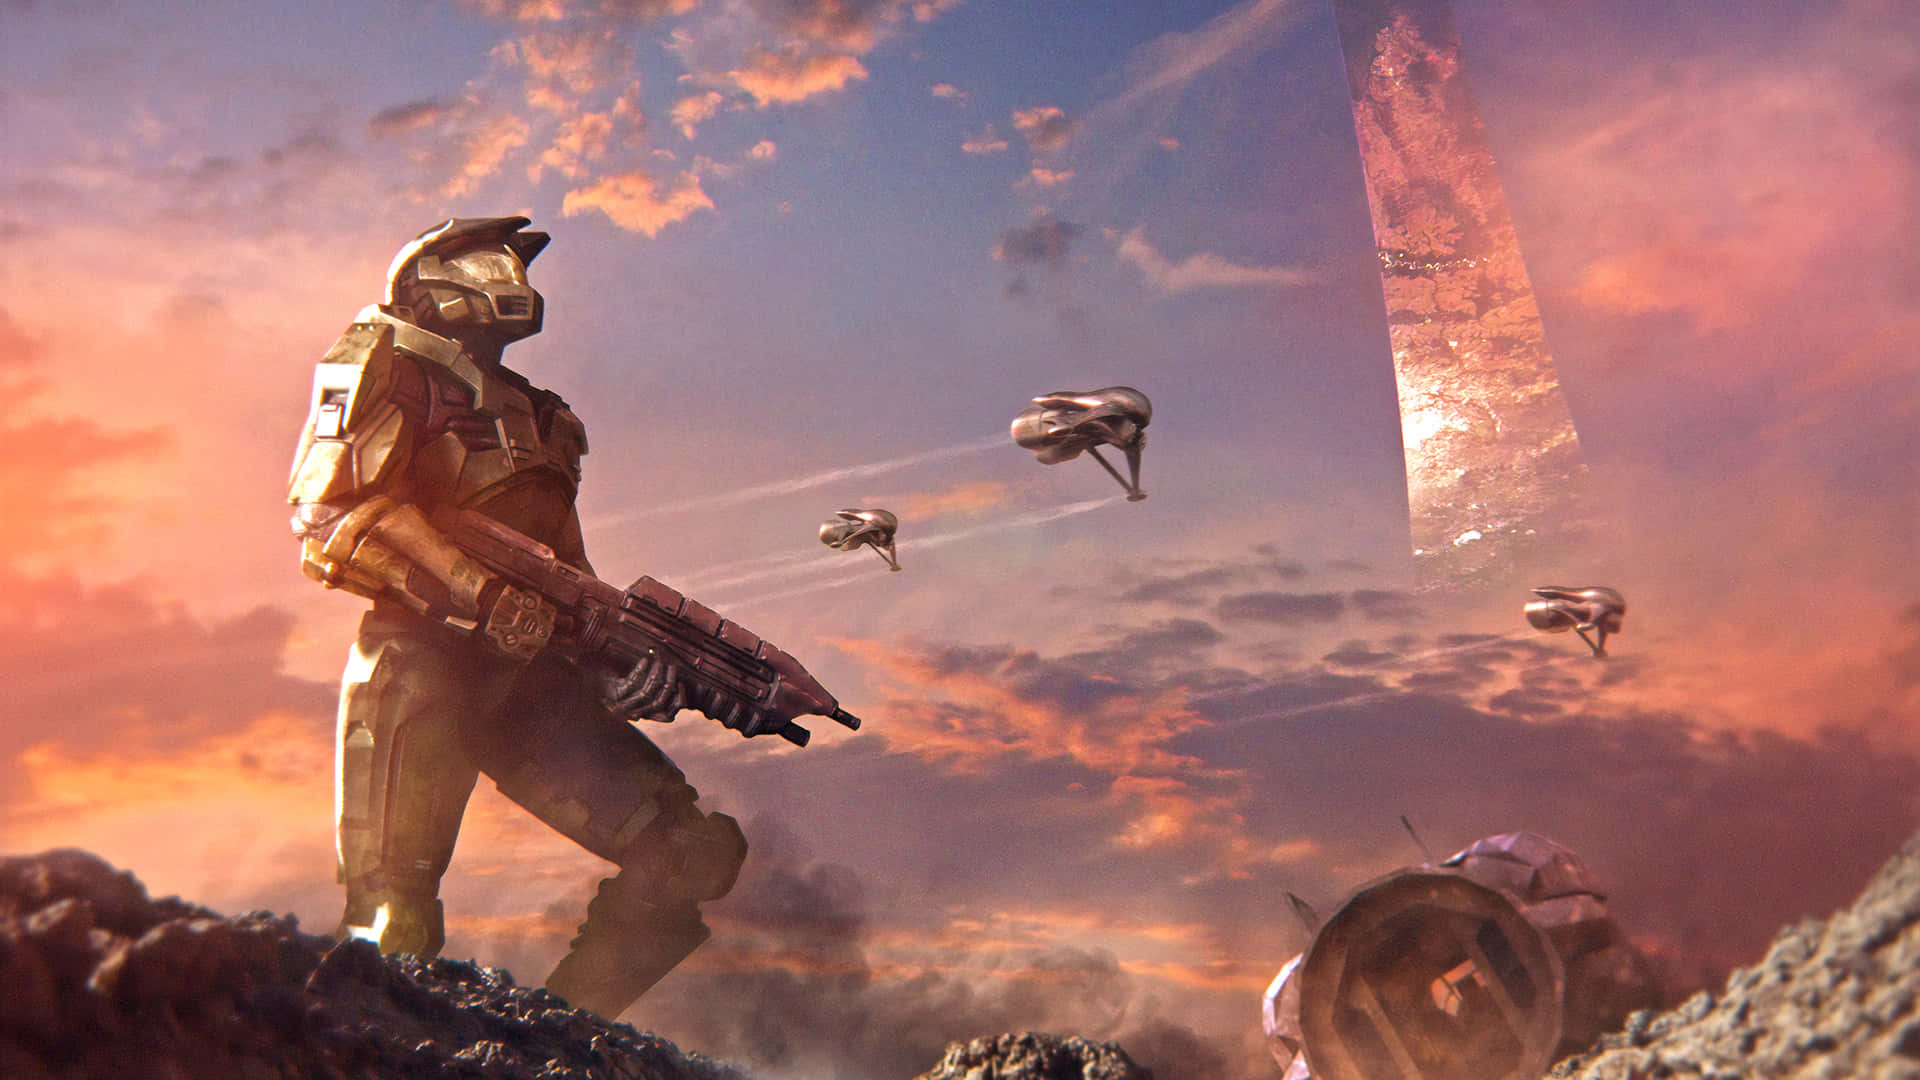 Cool Halo Soldier With Robot Airships Wallpaper